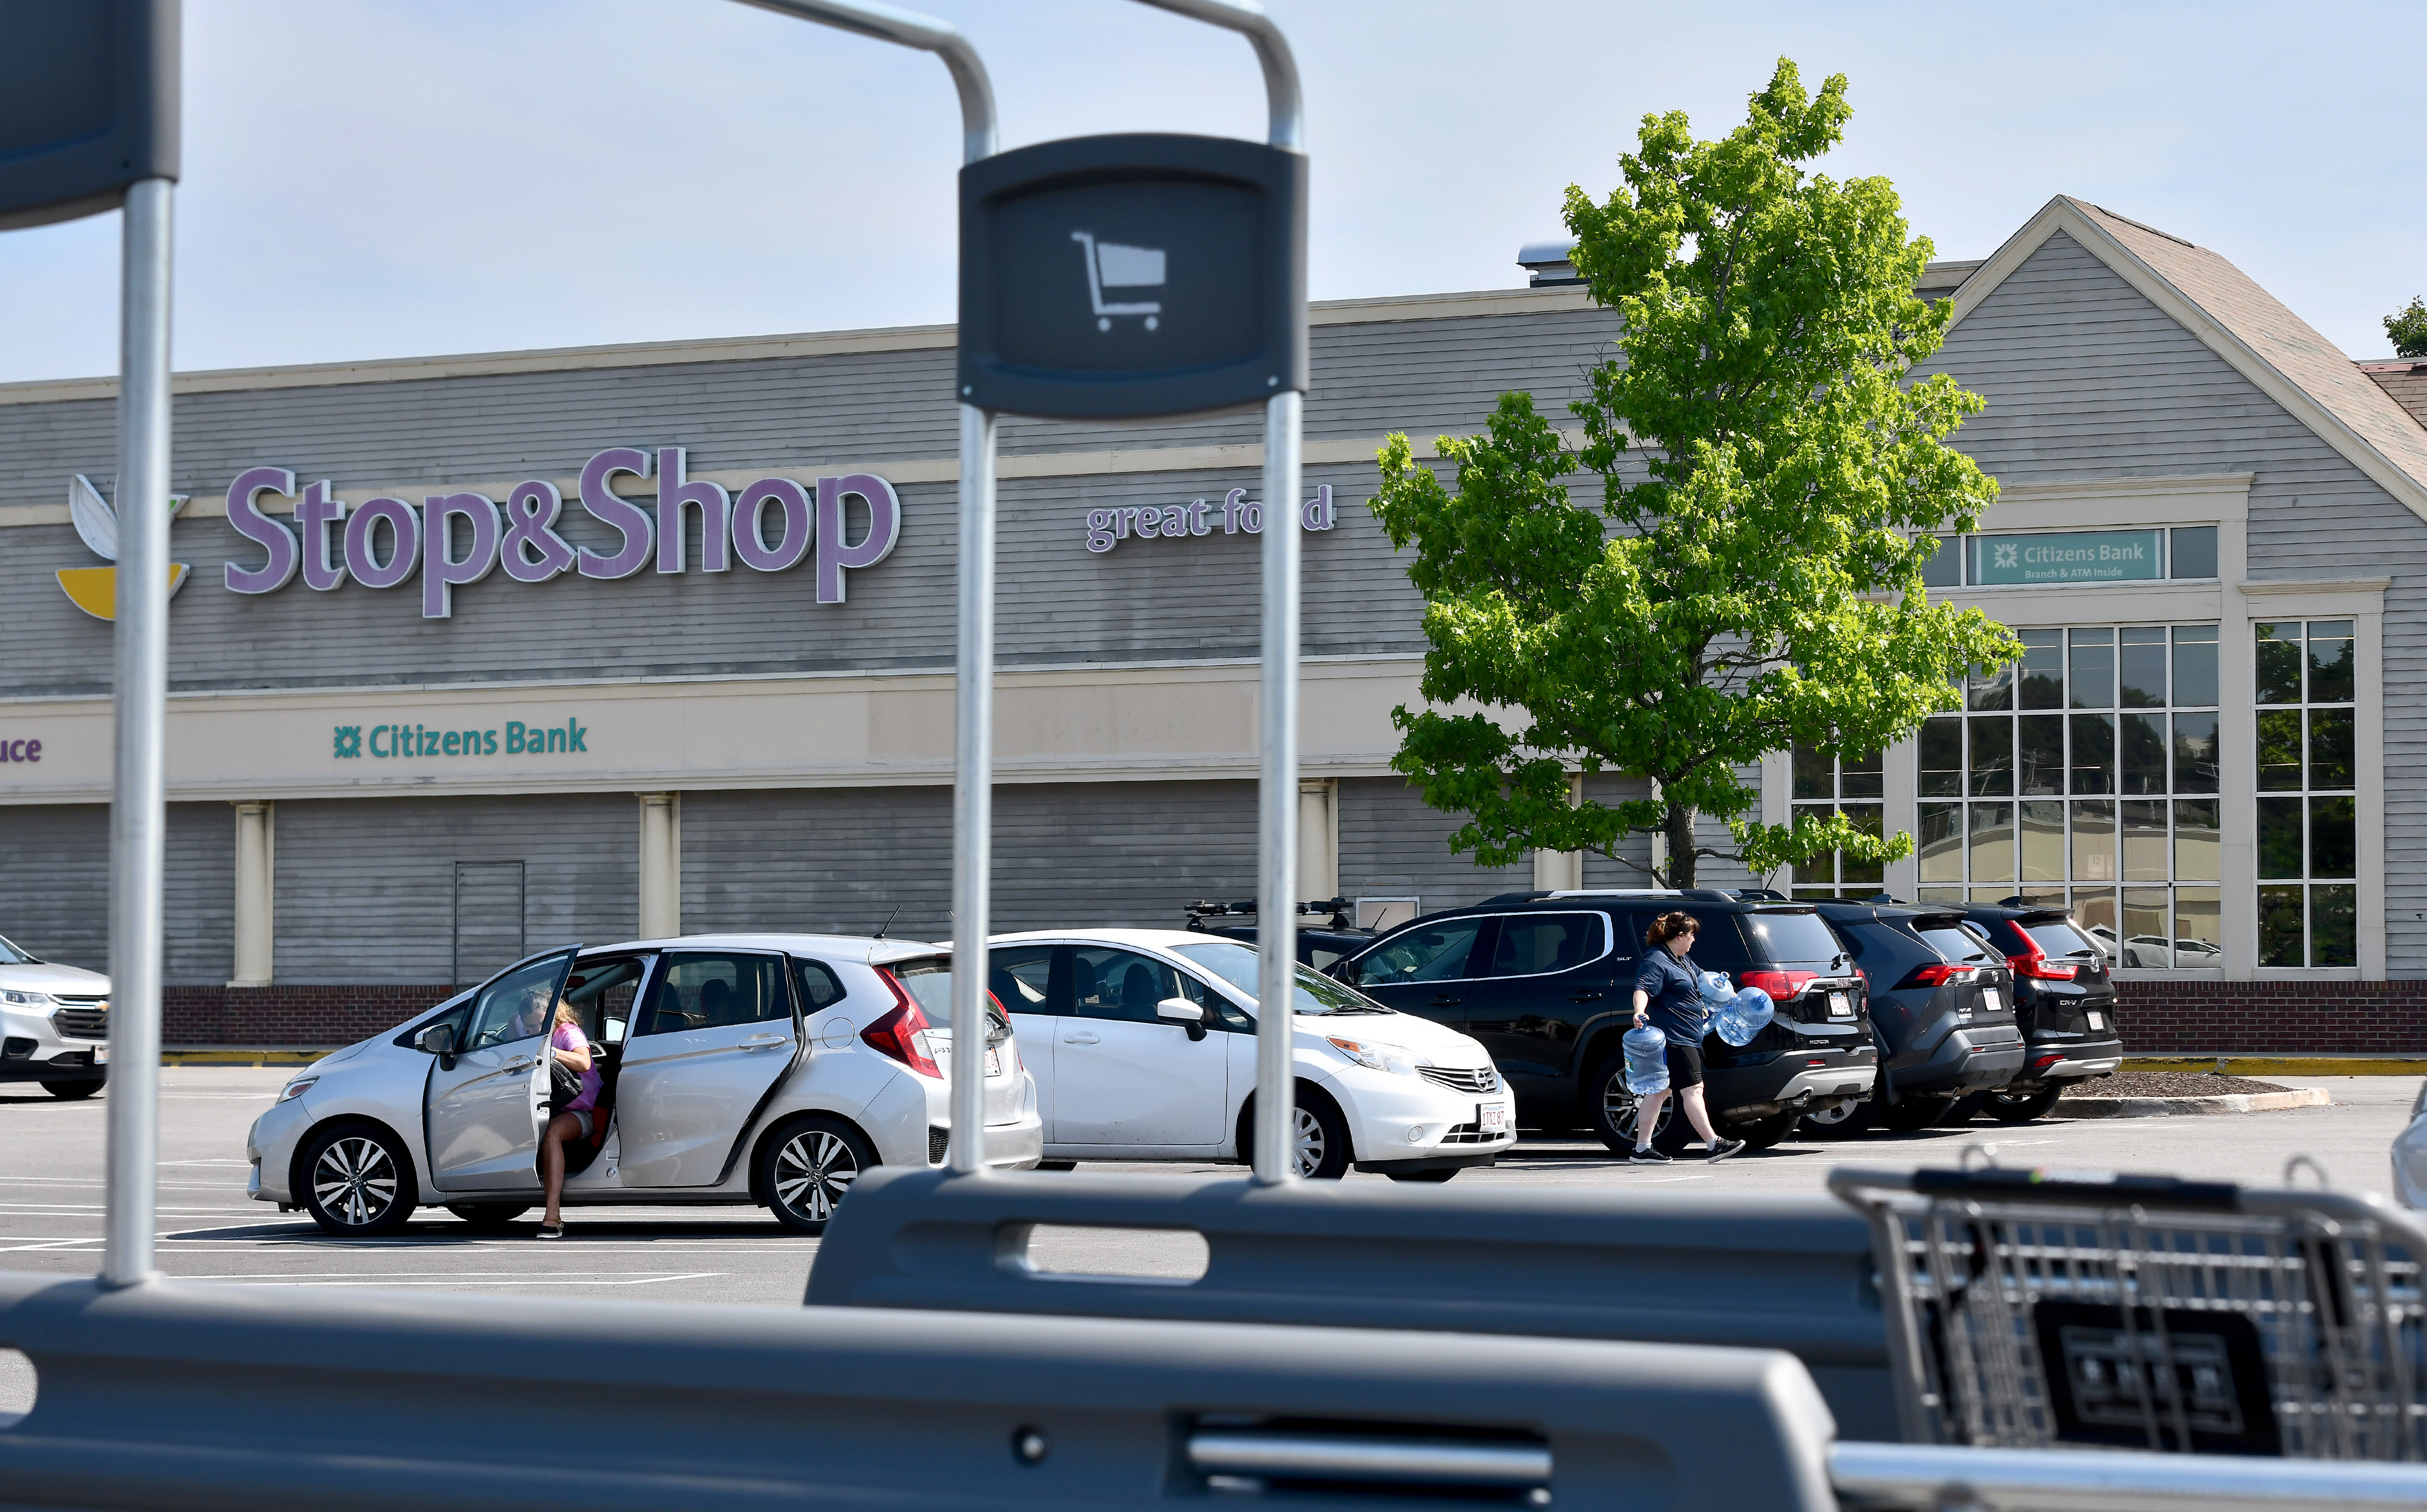 Employees to retain jobs after Stop & Shop closes Lincoln St. store, chain tells city